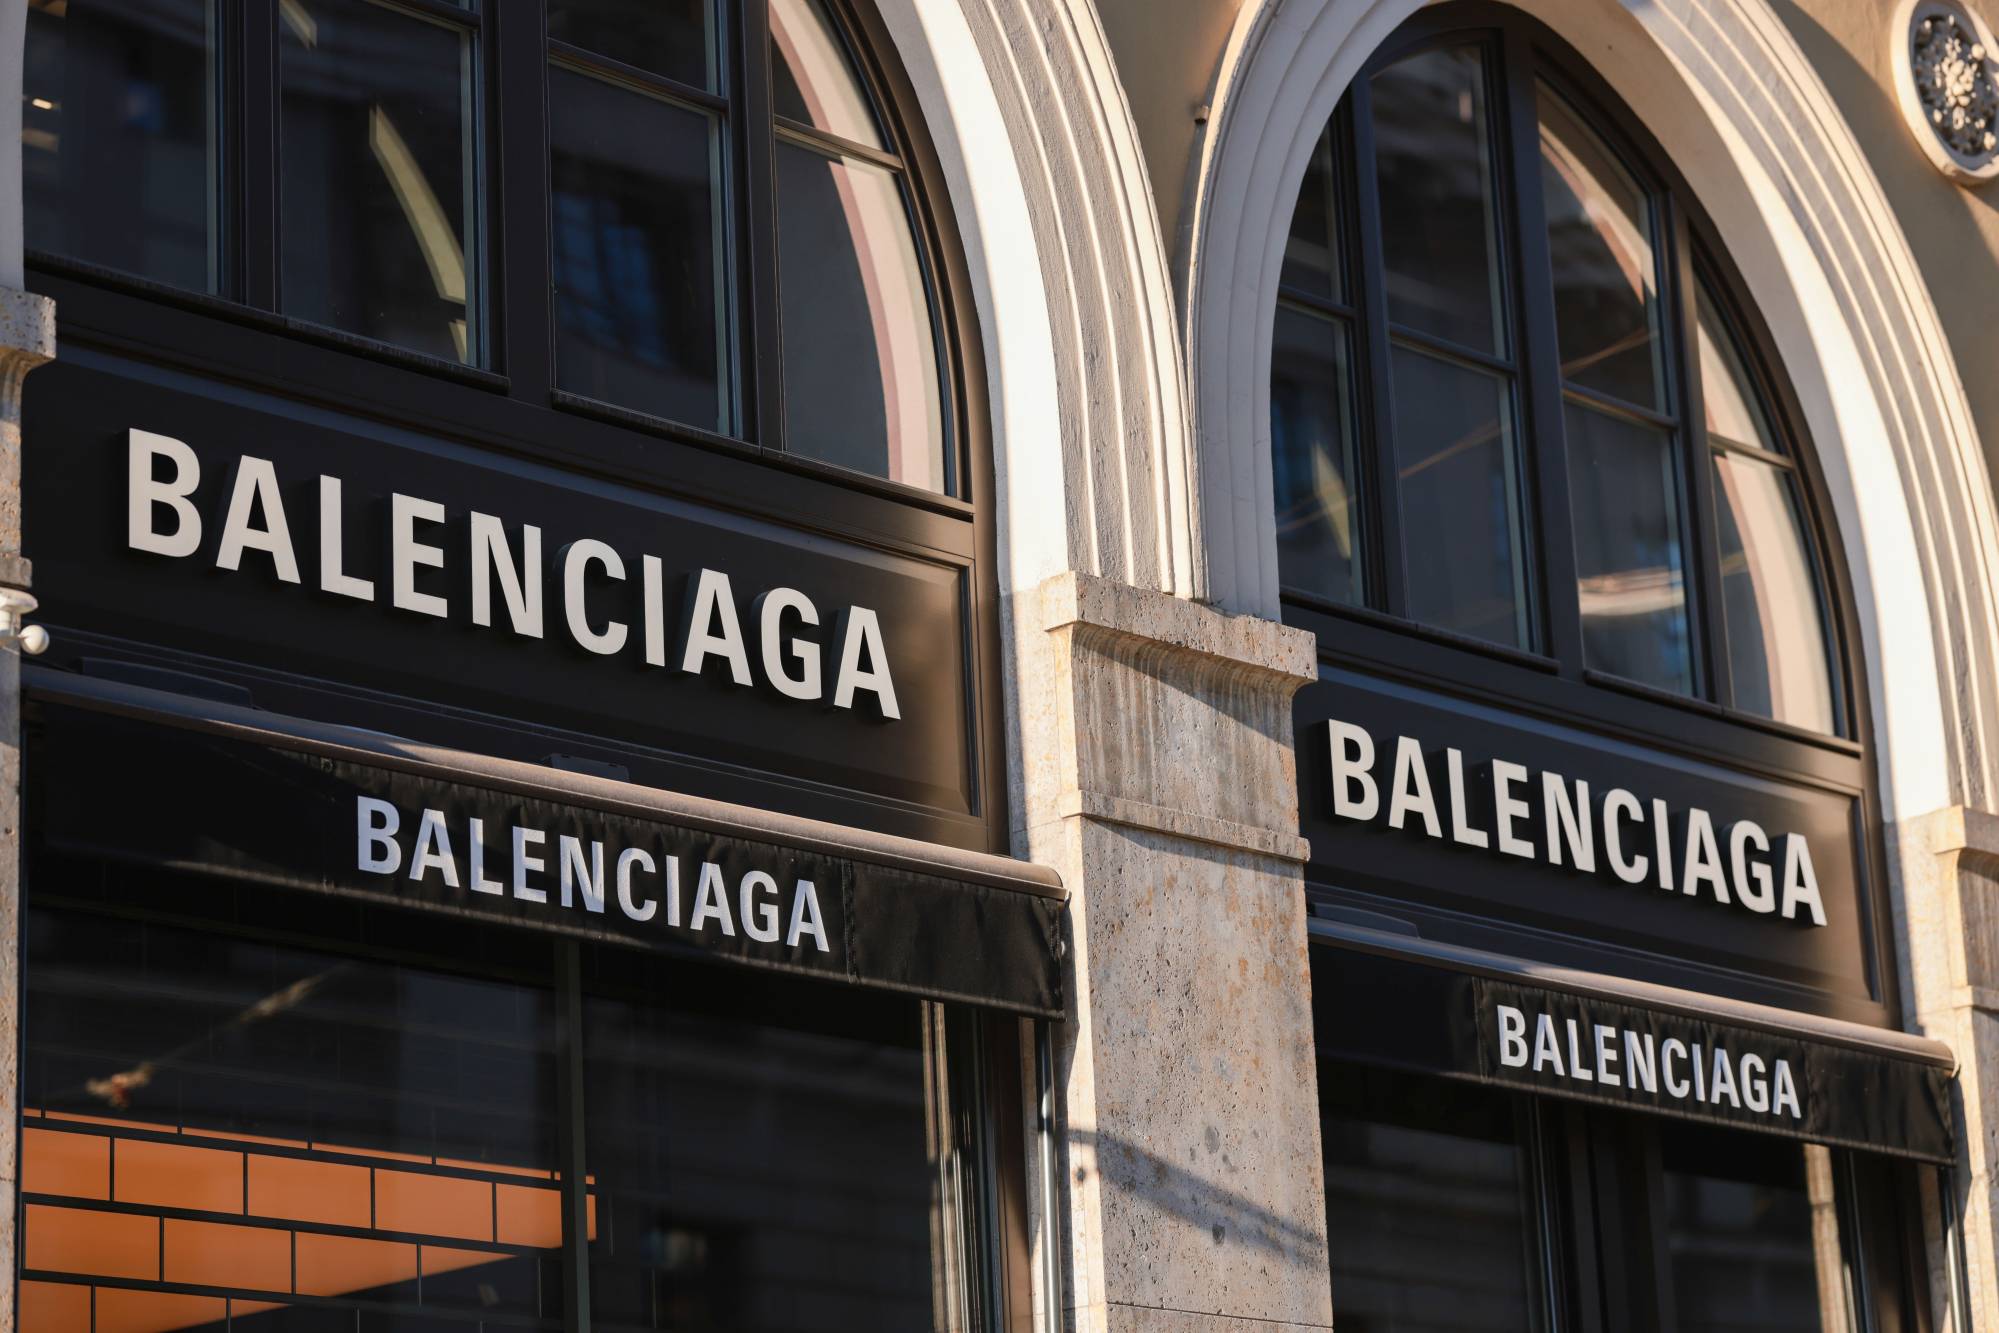 Balenciaga's long road back to redemption following child exploitation  scandal